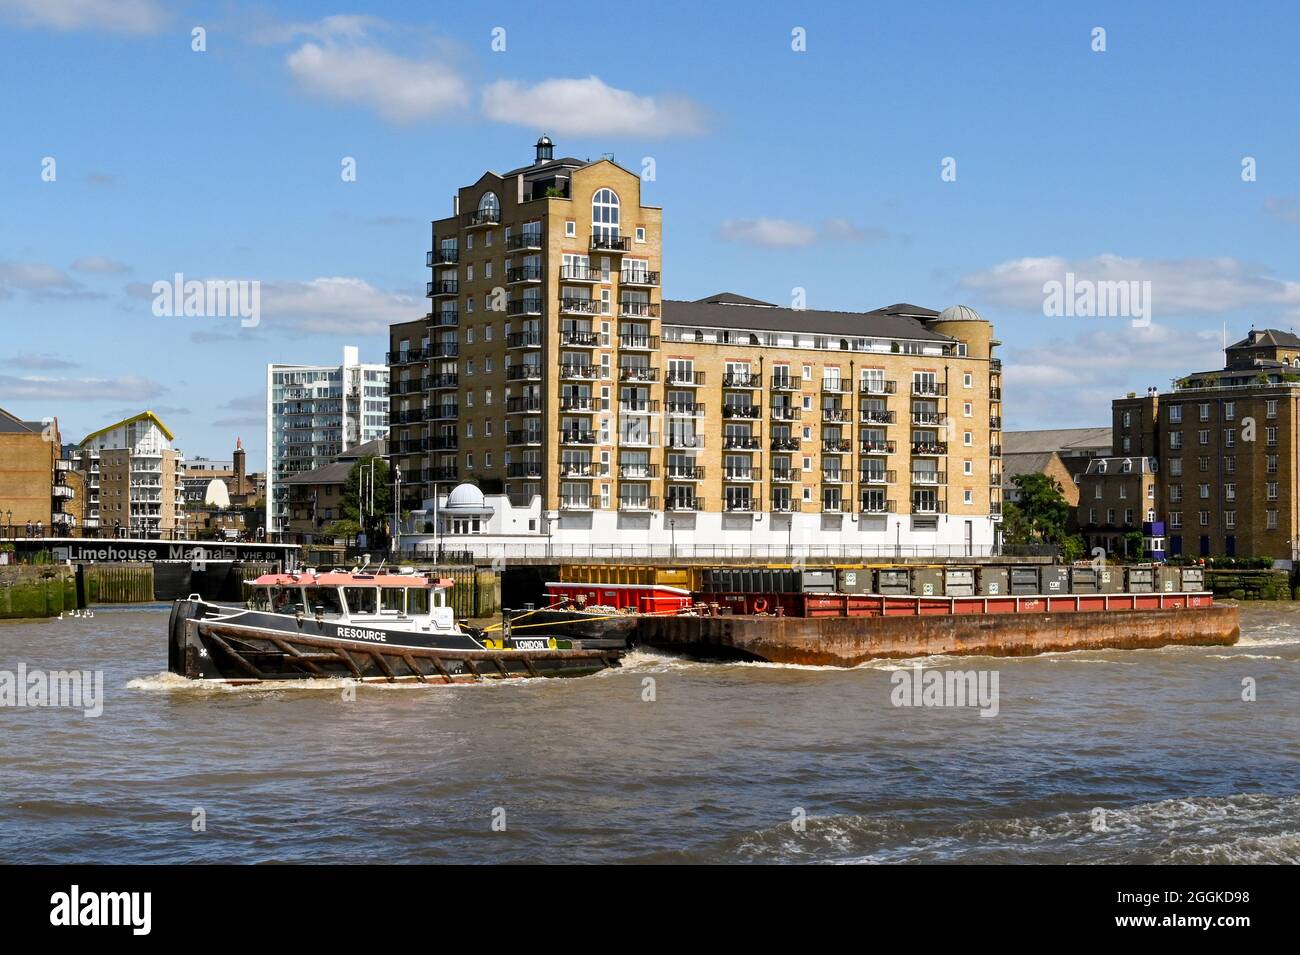 London, England - August 2021: Industrial tugboat towing a large barge with containers on the River Thames. Stock Photo